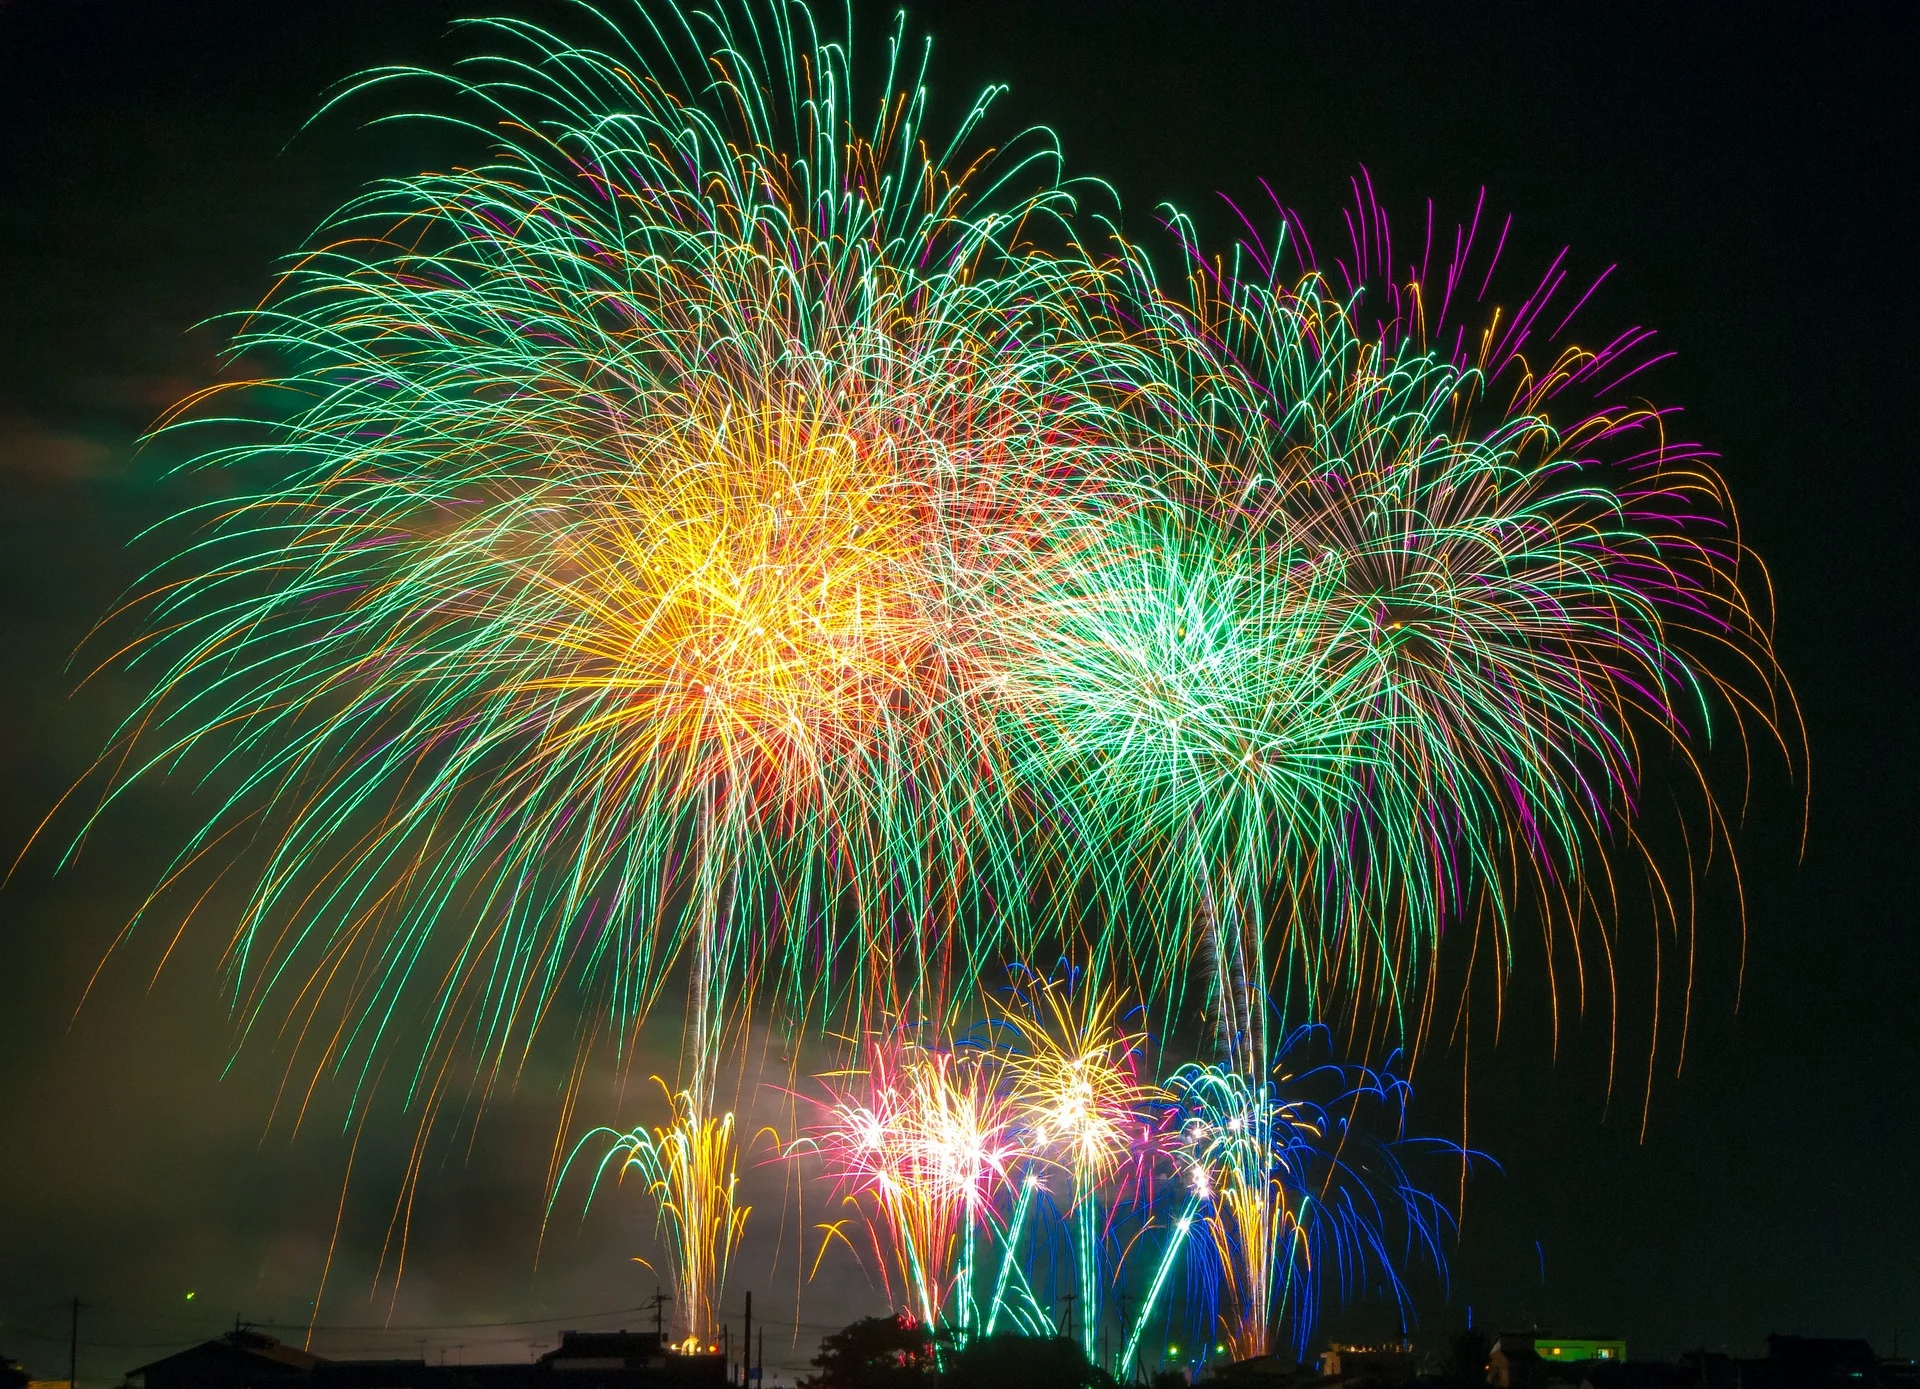 Planning on setting fireworks off on Canada Day? Read THIS first